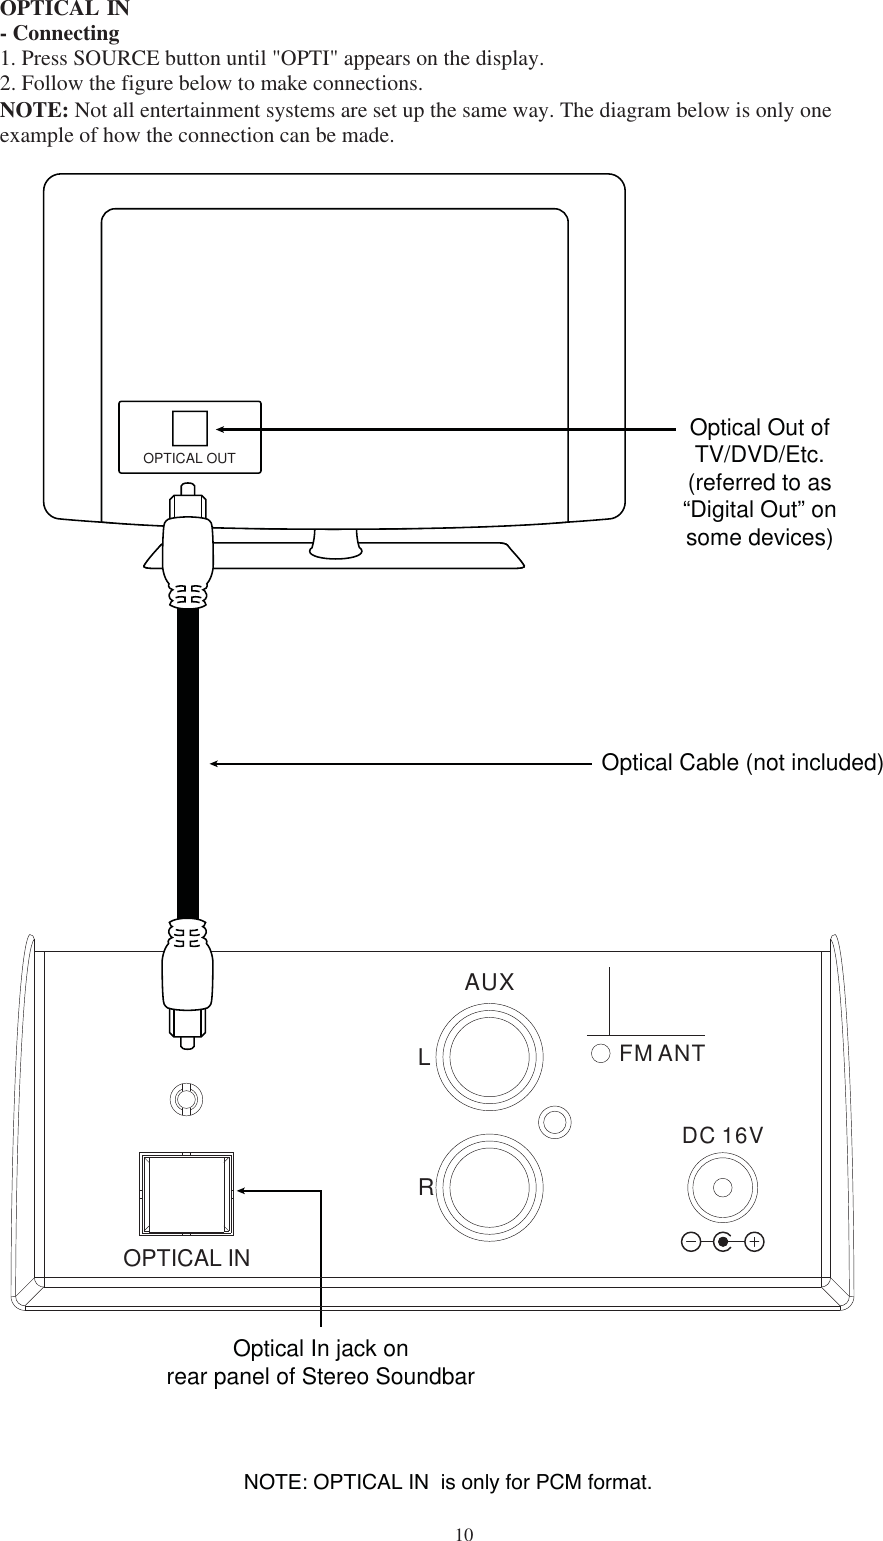   10  OPTICAL  IN - Connecting 1. Press SOURCE button until &quot;OPTI&quot; appears on the display.2.NOTE: Not all entertainment systems are set up the same way. The diagram below is only oneexample of how the connection can be made. Follow the figure below to make connections.                Optical Out ofTV/DVD/Etc.(referred to as“Digital Out” onsome devices)Optical Cable (not included)OPTICAL OUTOptical In jack onrear panel of Stereo SoundbarAUX FM ANTDC 16VOPTICAL INLRNOTE: OPTICAL IN  is only for PCM format.